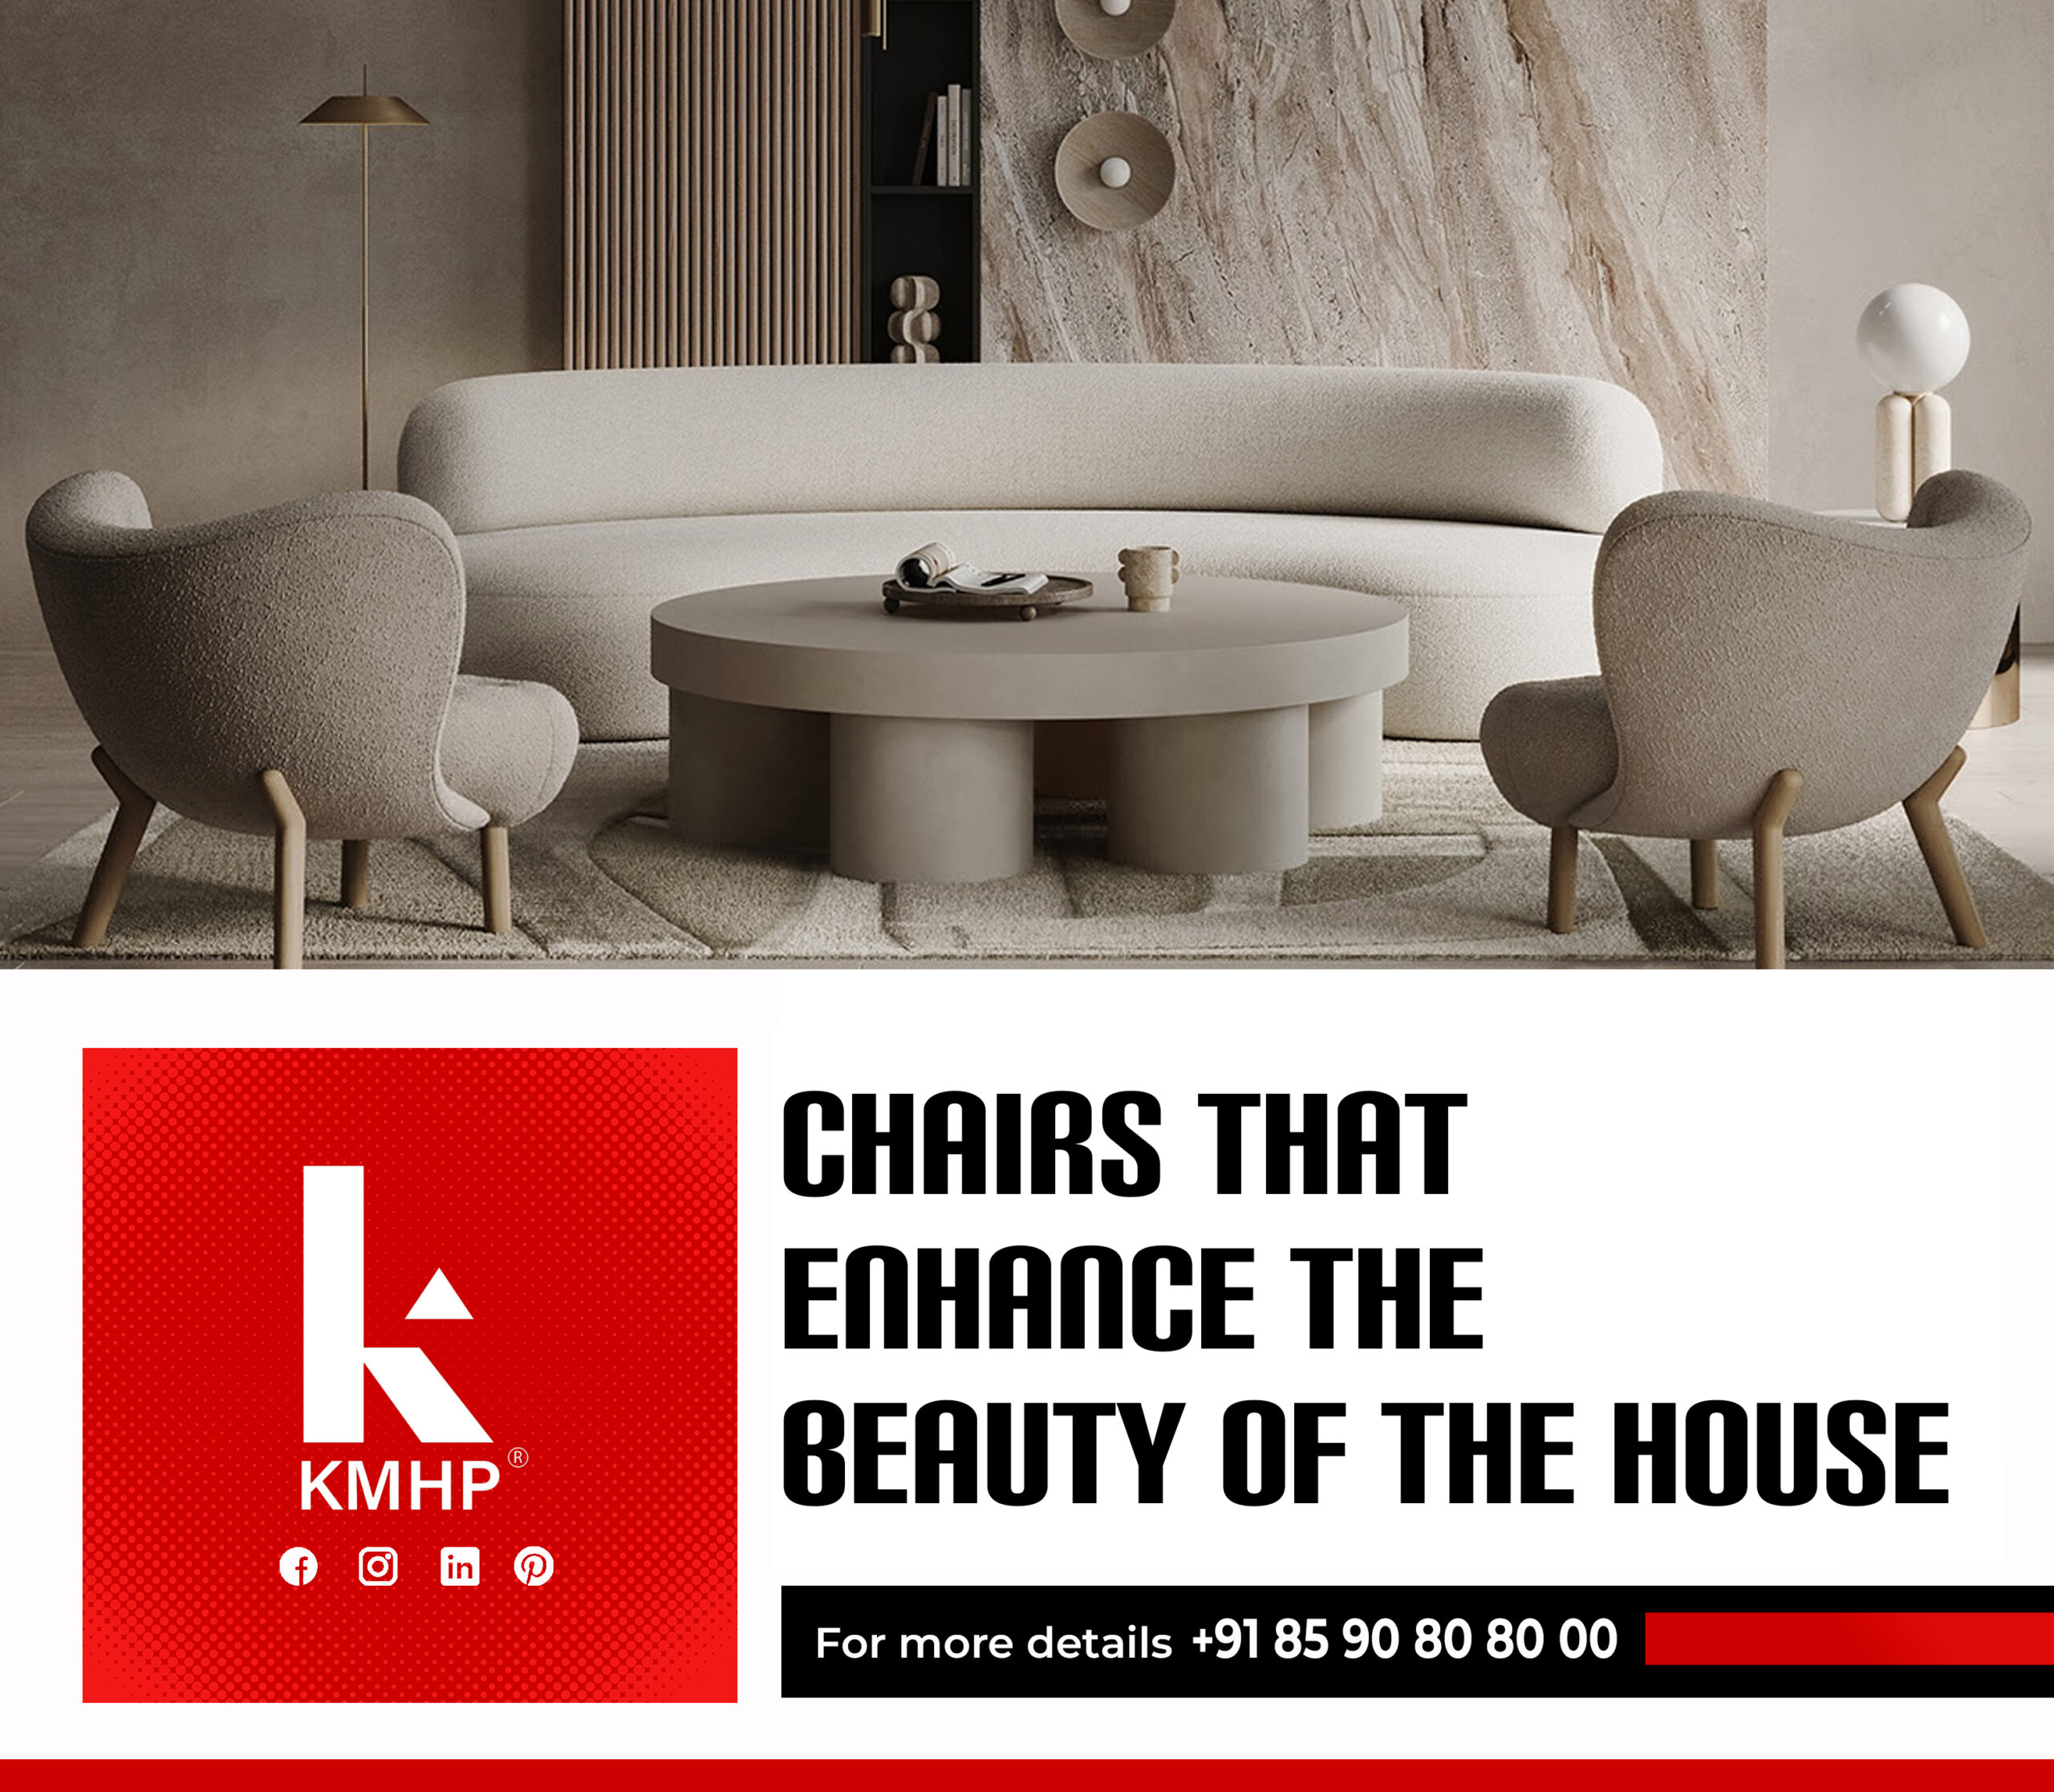 Chairs that enhance the beauty of the house